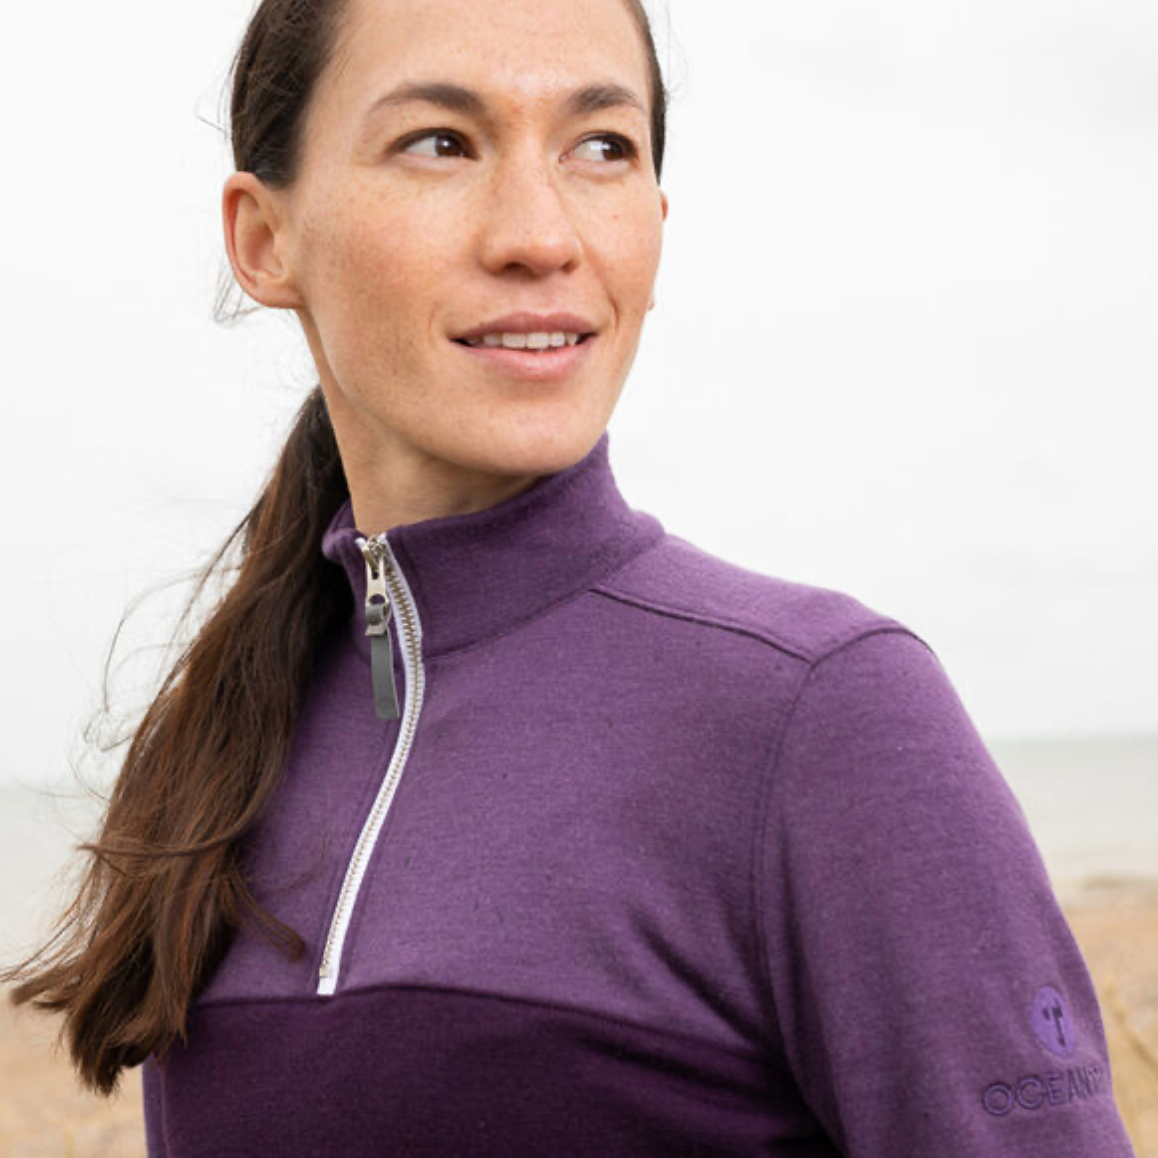 Oceantee Women's Manta Mid-Layer - 5 Sizes Available